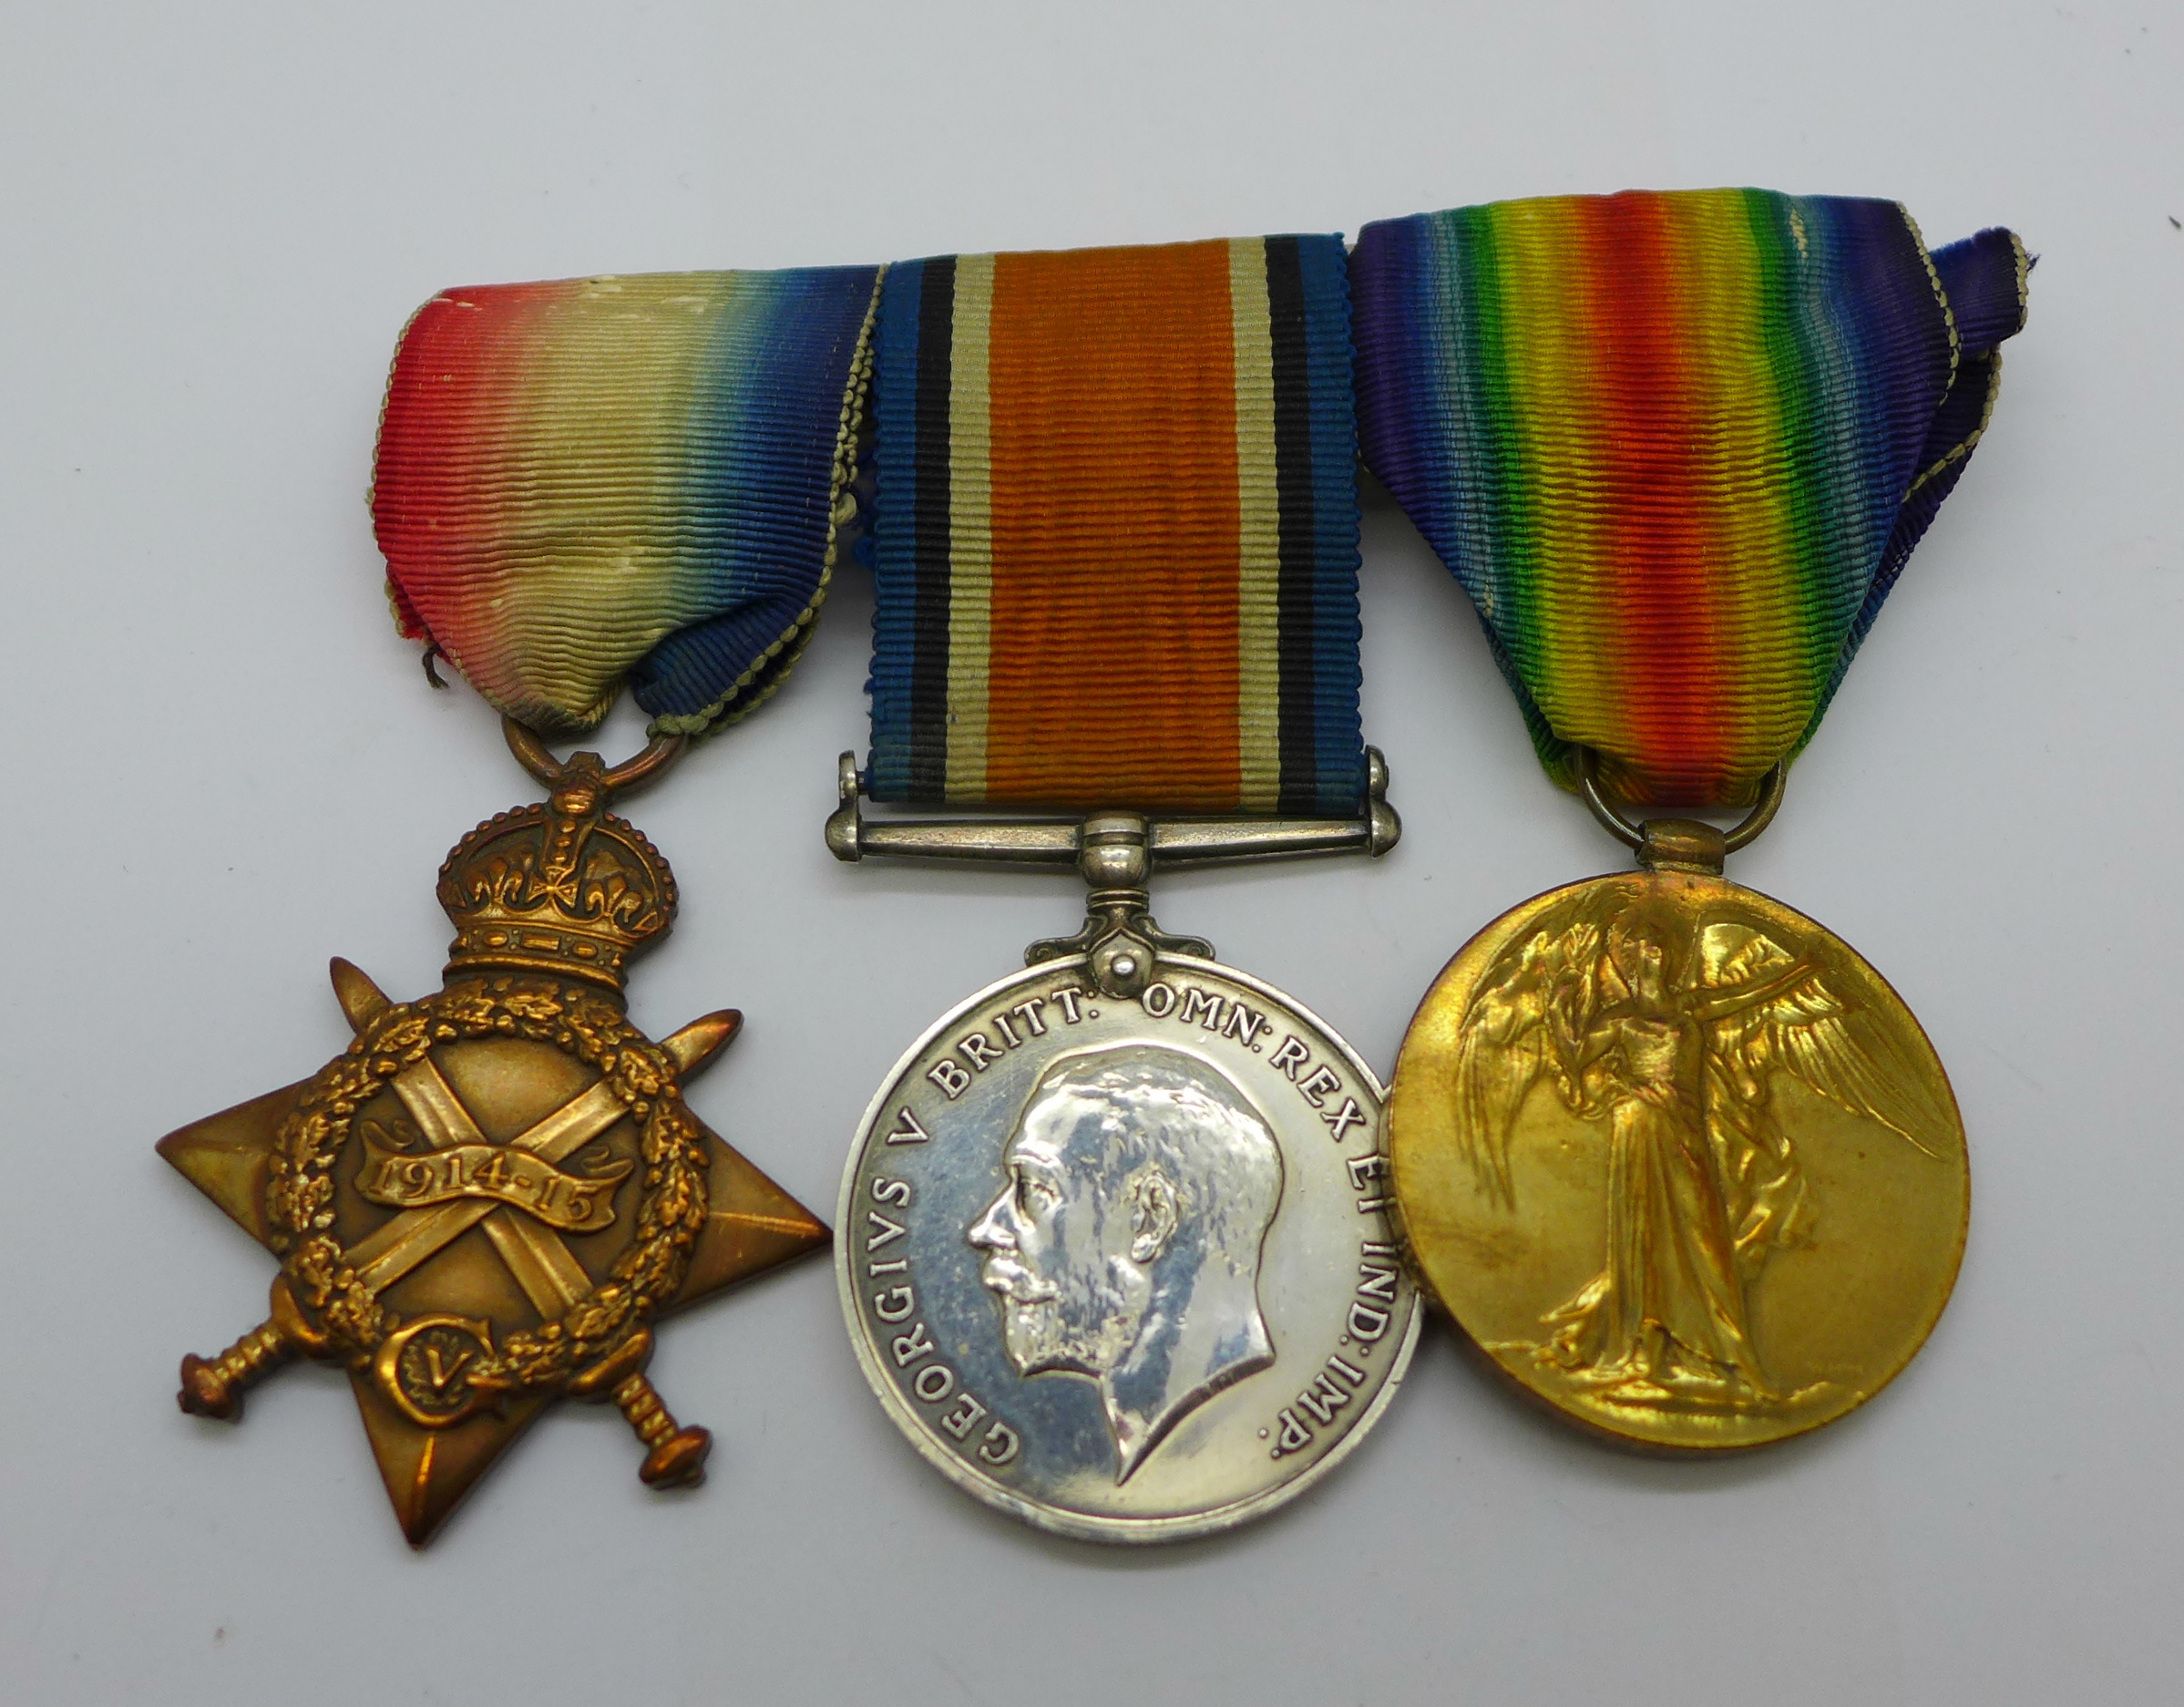 A trio of WWI medals, 64115 Pte. G. Johnstone R.A.M.C.